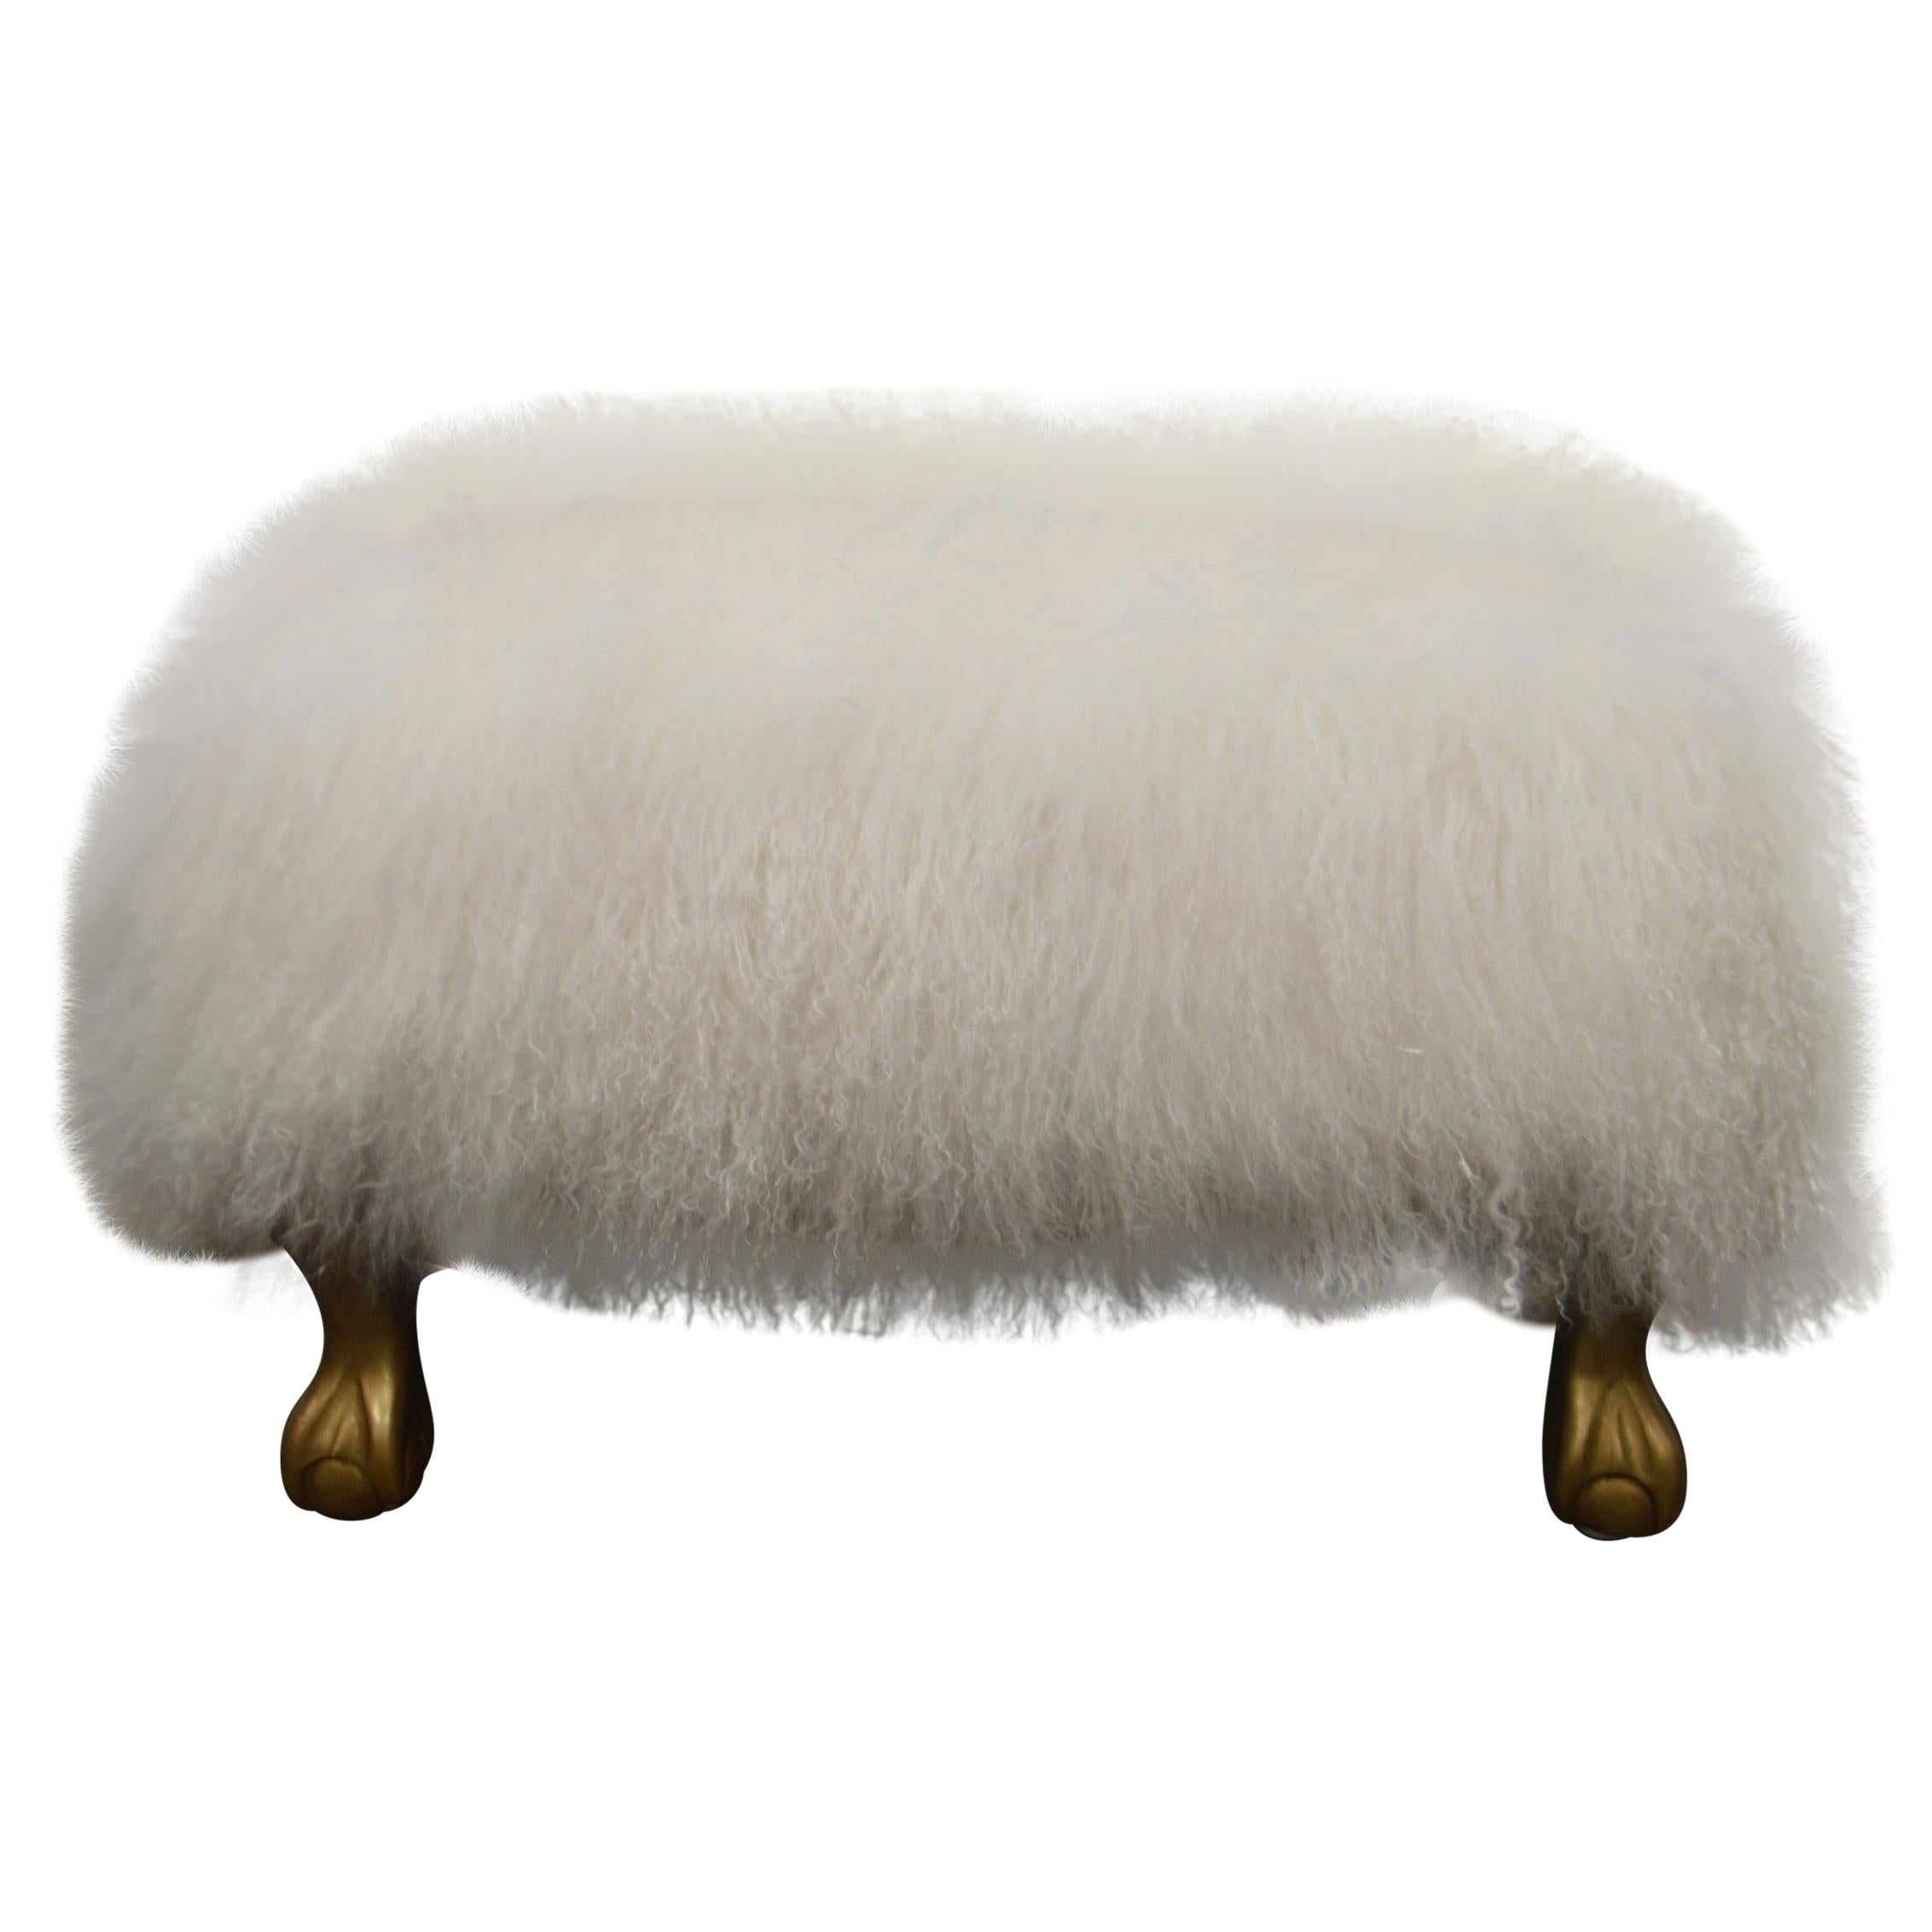 White Curly Lambswool Skin Ottoman, on Gilded Legs, Custom Made